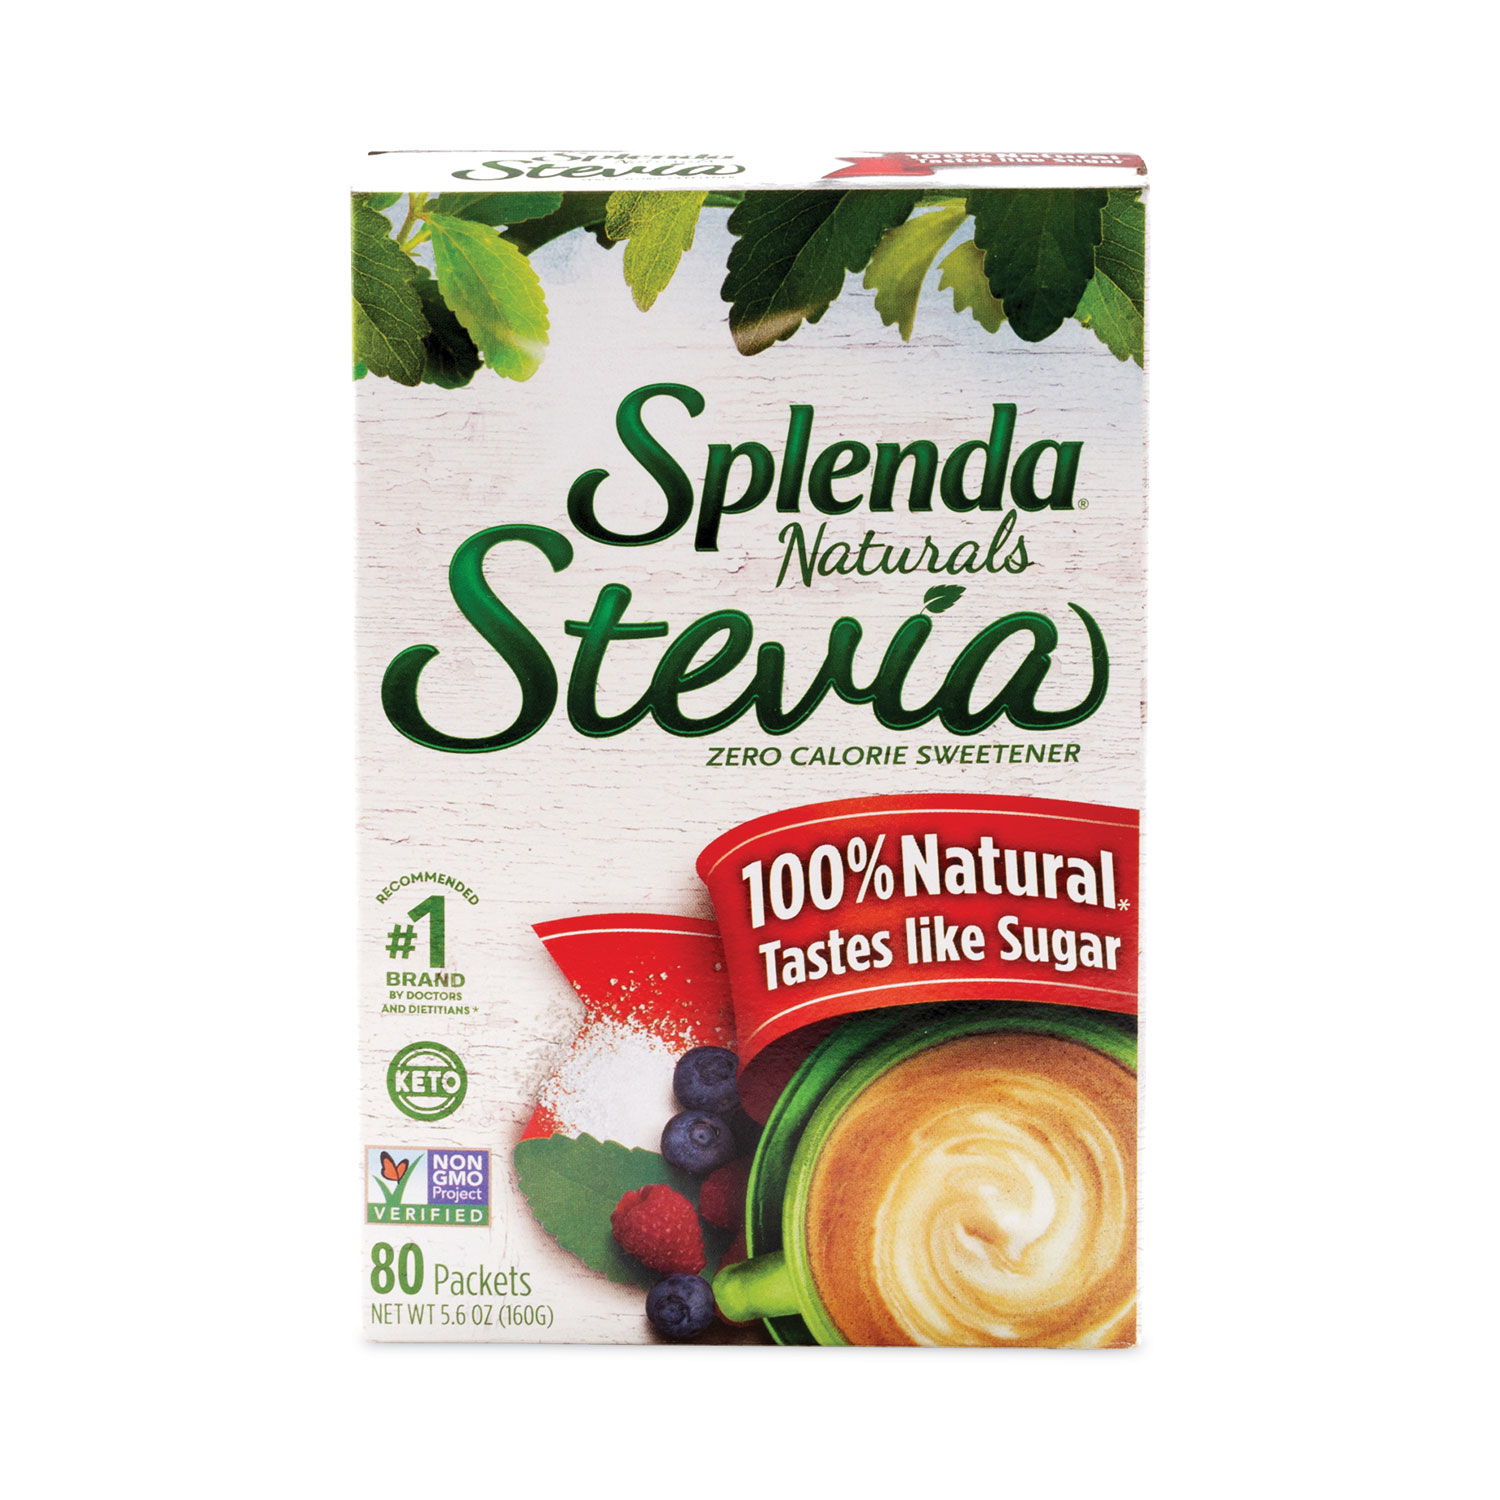 Pure Via All Natural Stevia Sweetener Packets, Zero Calorie, 80 Ct